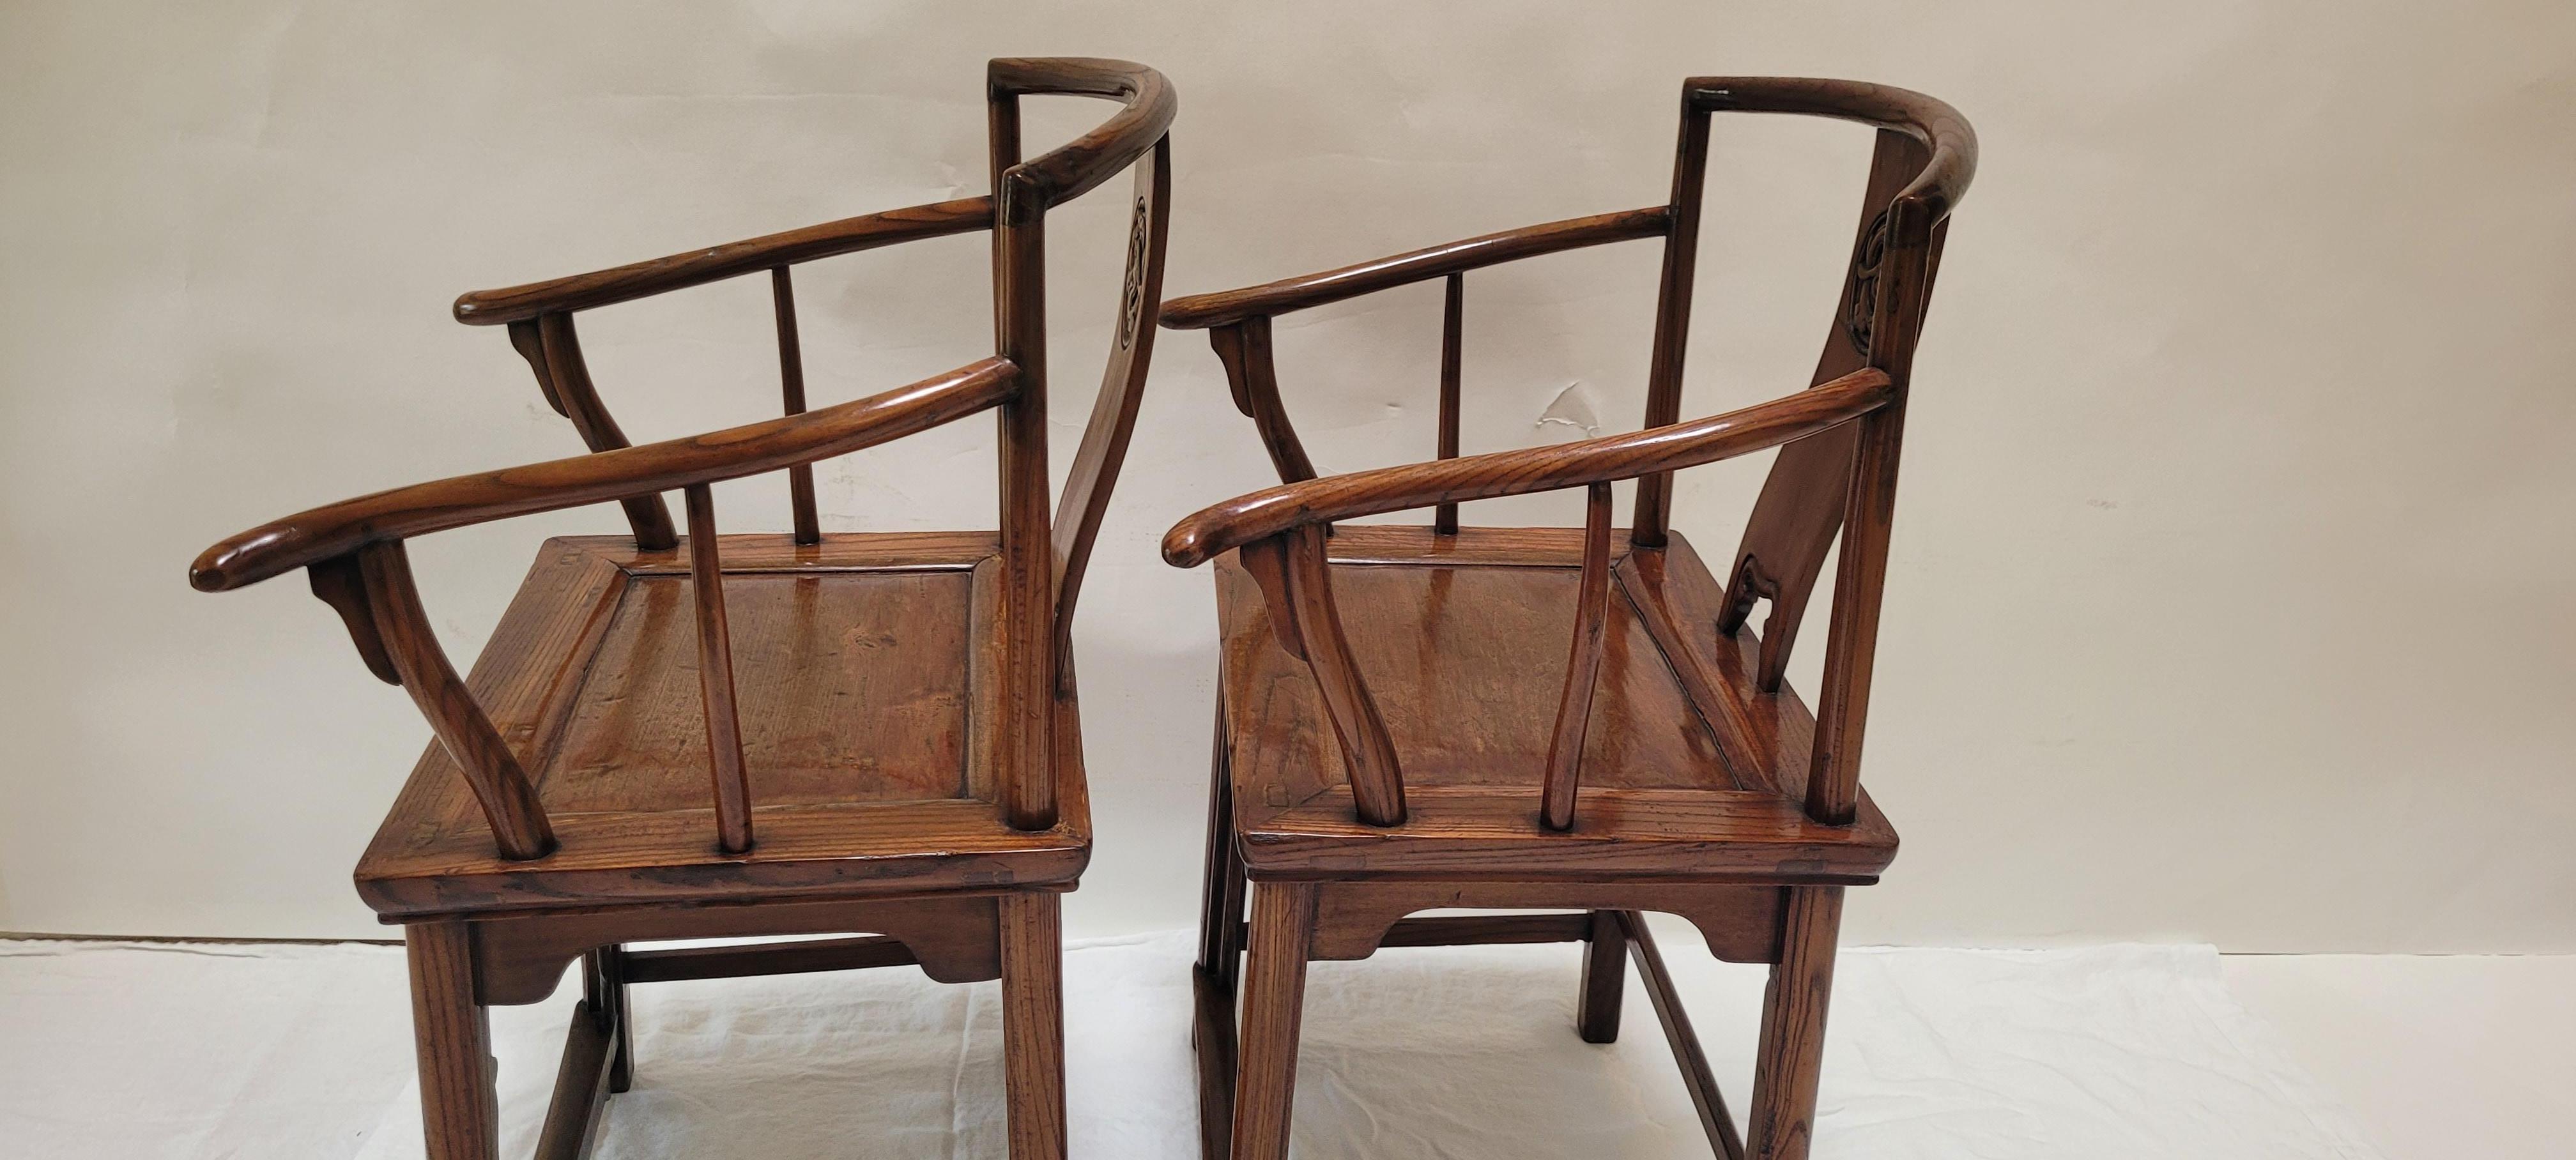  Pair of Wenyi Armchairs	37.25h x 22w x 16.75d
This is a pair of Wenyi (scholar) armchairs.  The crestrail does not have any protruding ends, but the arms do.  This pair is considered a bit unusual as the supporting stiles under the arms are not a